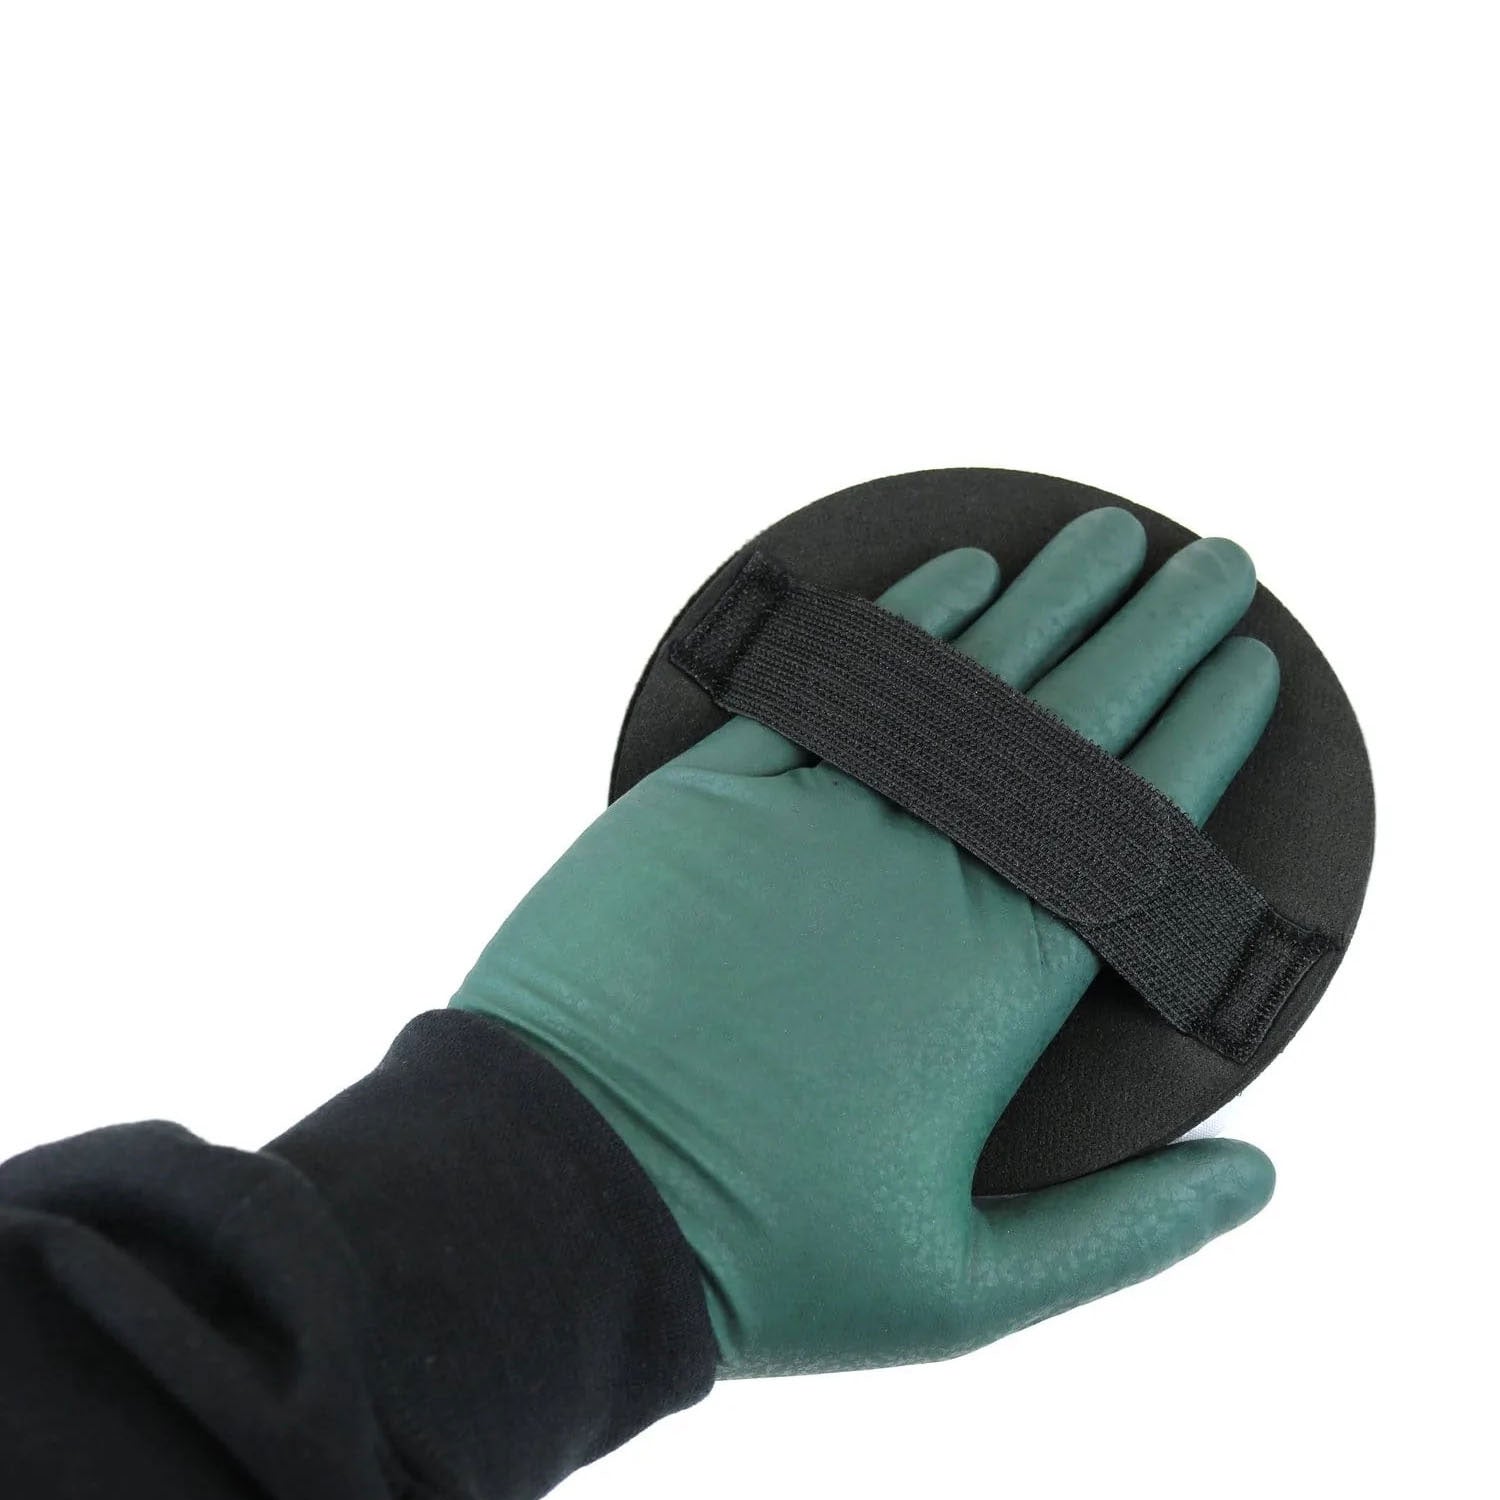 clay-disc-with-velcro-strap-on-hand